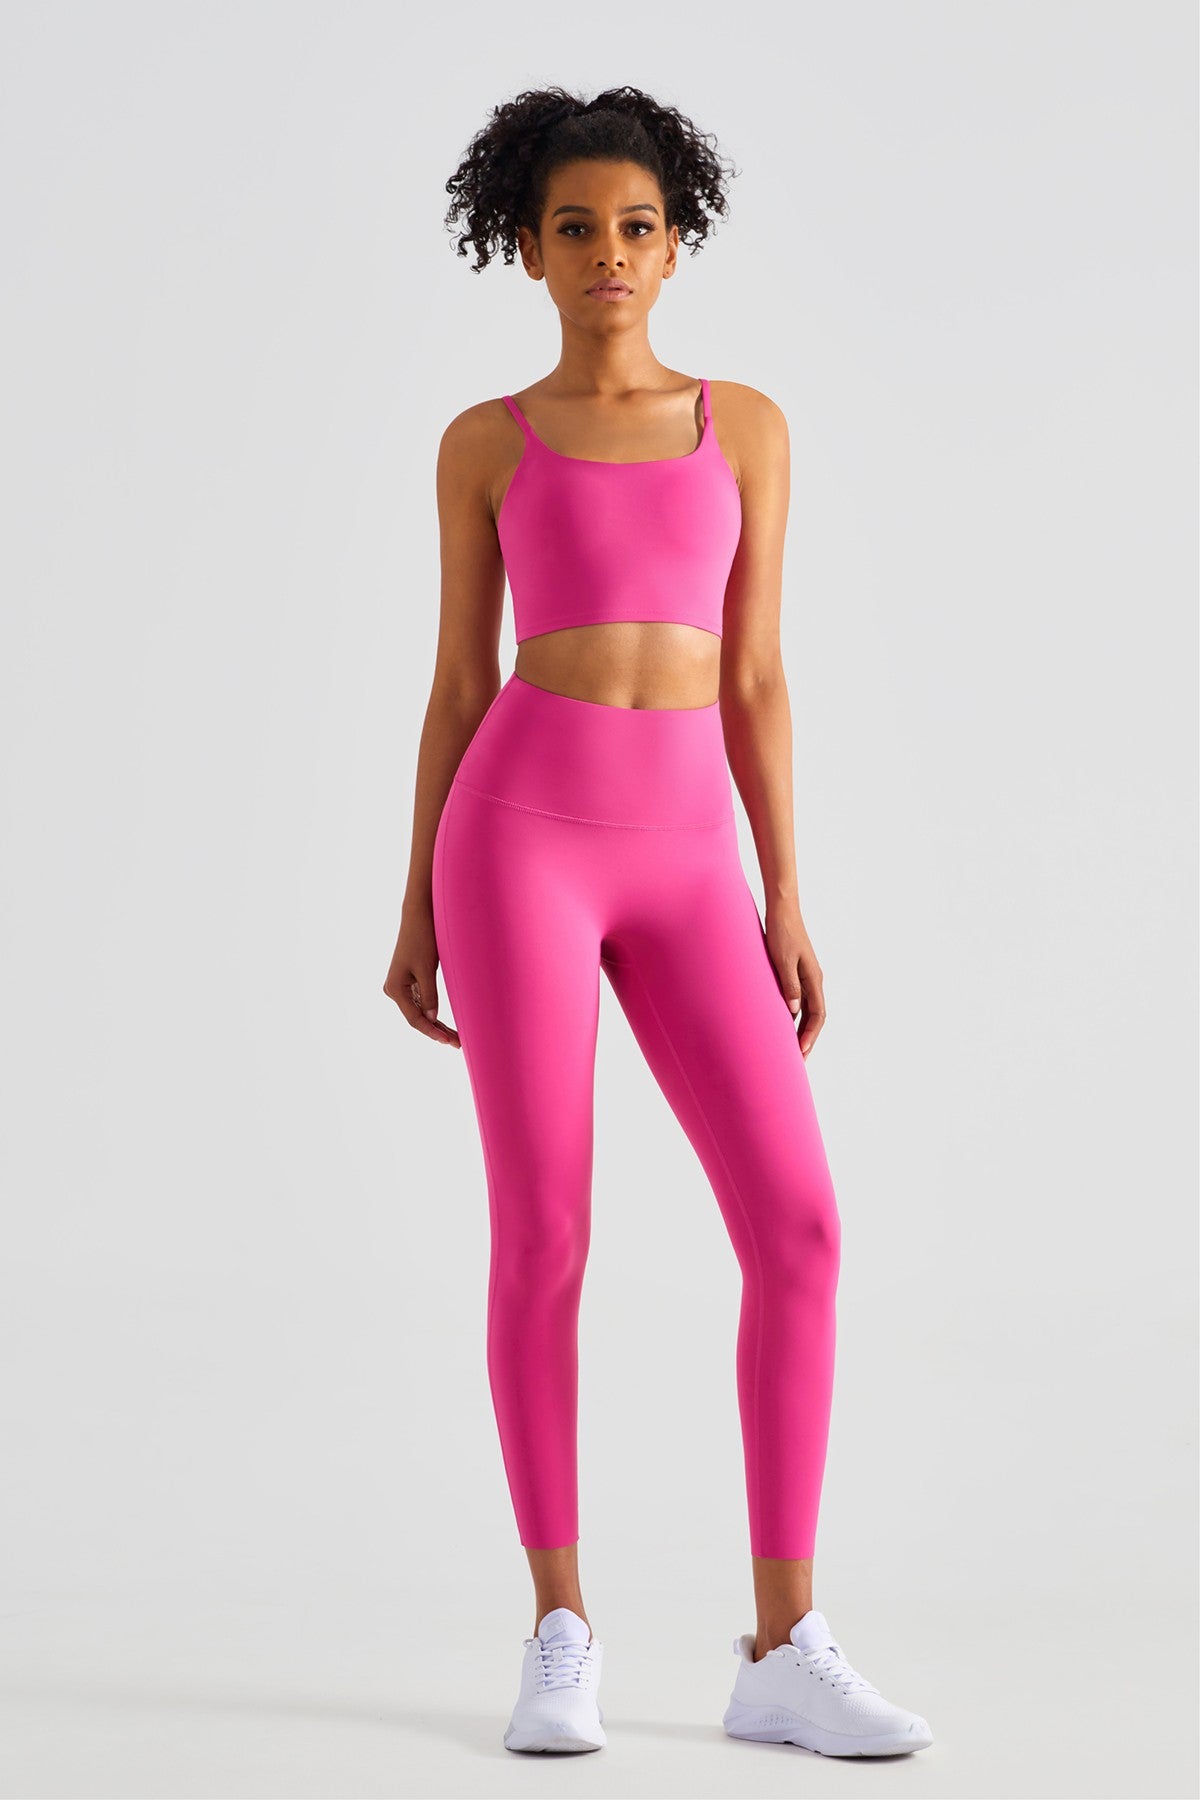 Savvi Fit Pink Bra and Leggings Set with White Accent Stripes